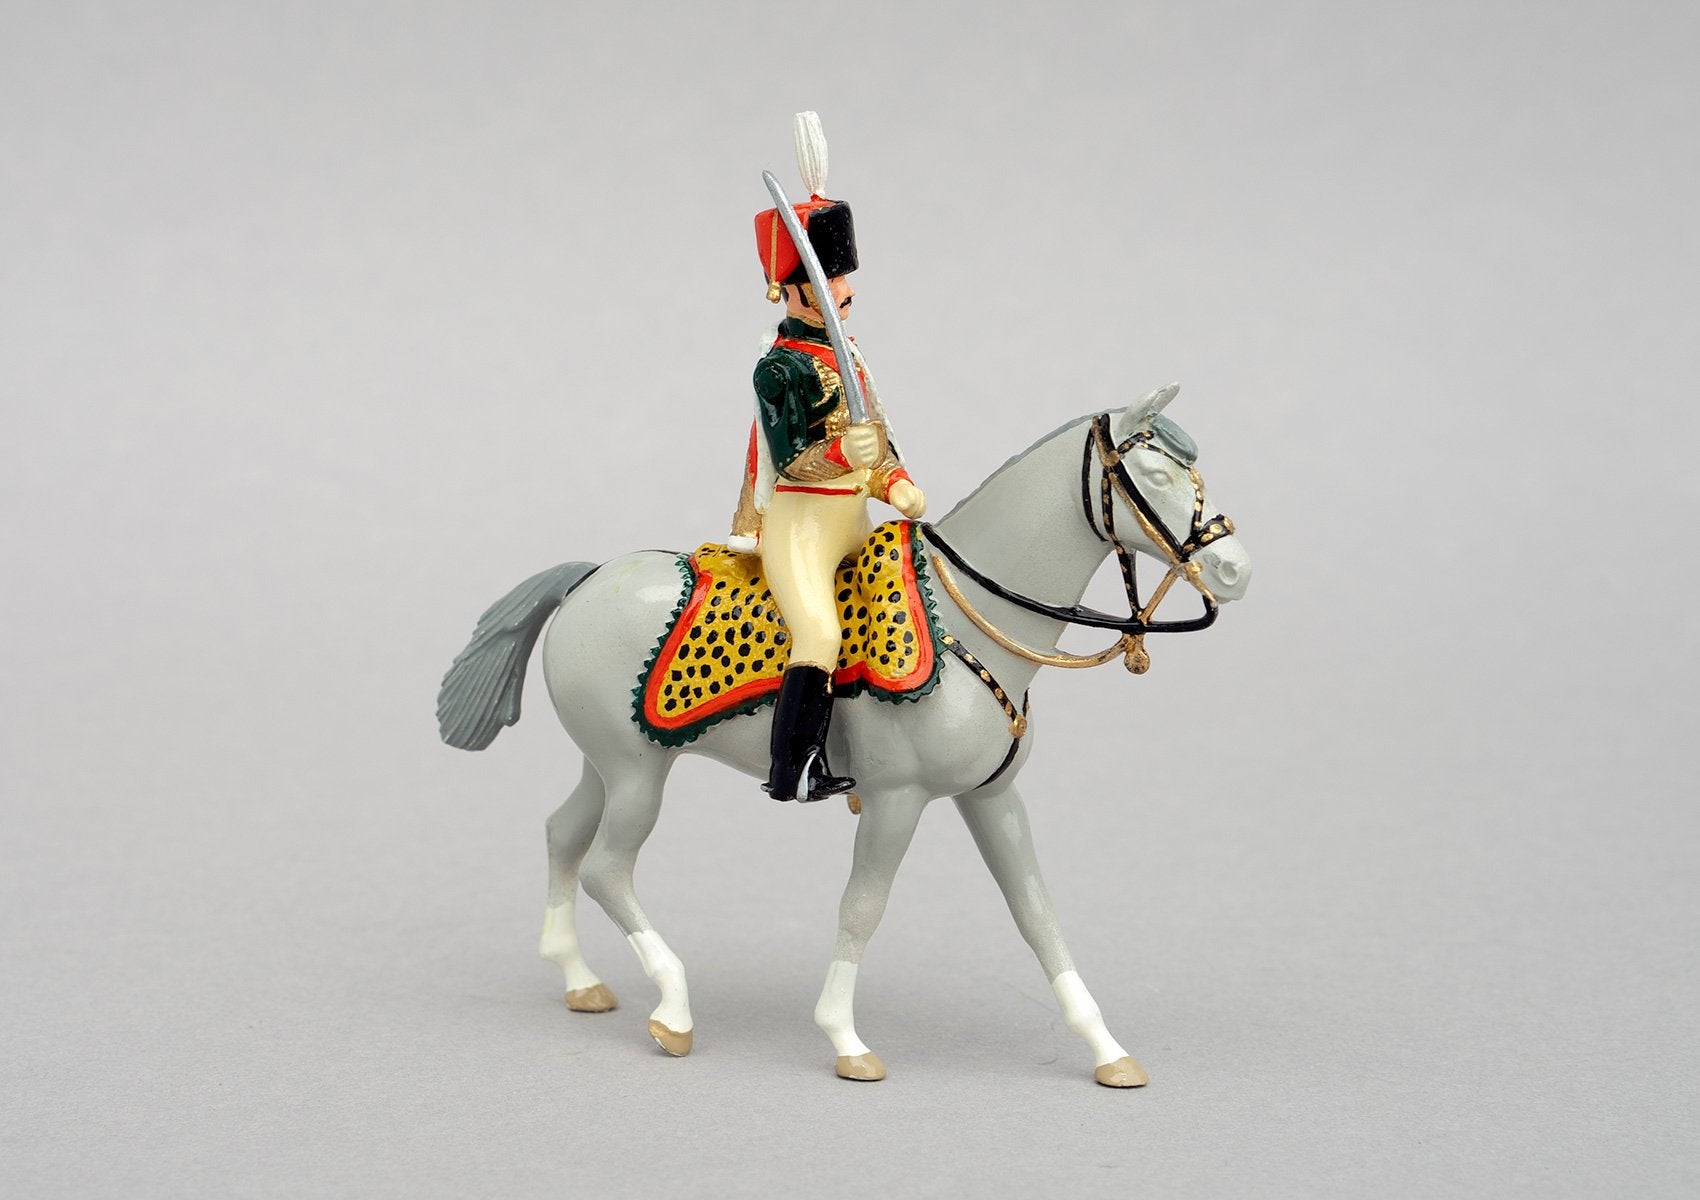 Set 96 Prince Eugene de Beauharnais | French | Napoleonic Wars | Single mounted figure on grey horse | Waterloo | © Imperial Productions | Sculpt by David Cowe